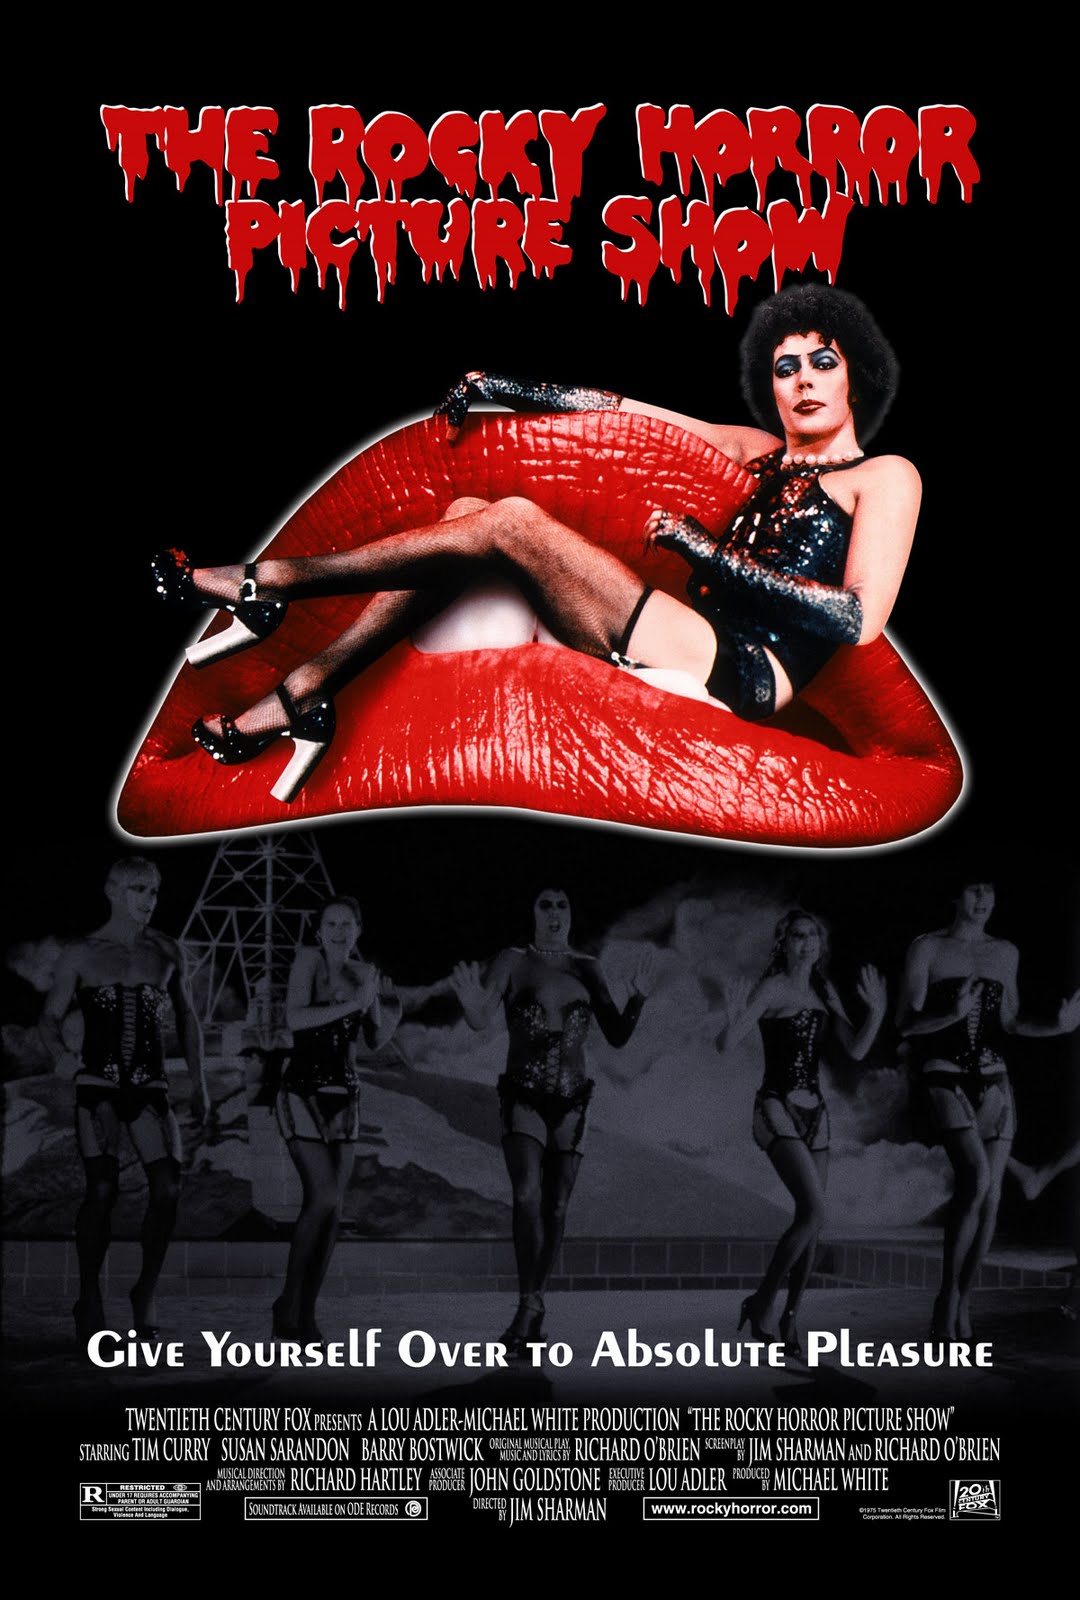 The Rocky Horror Picture Show: Budget 1.4 million Box office 139,876,417 million